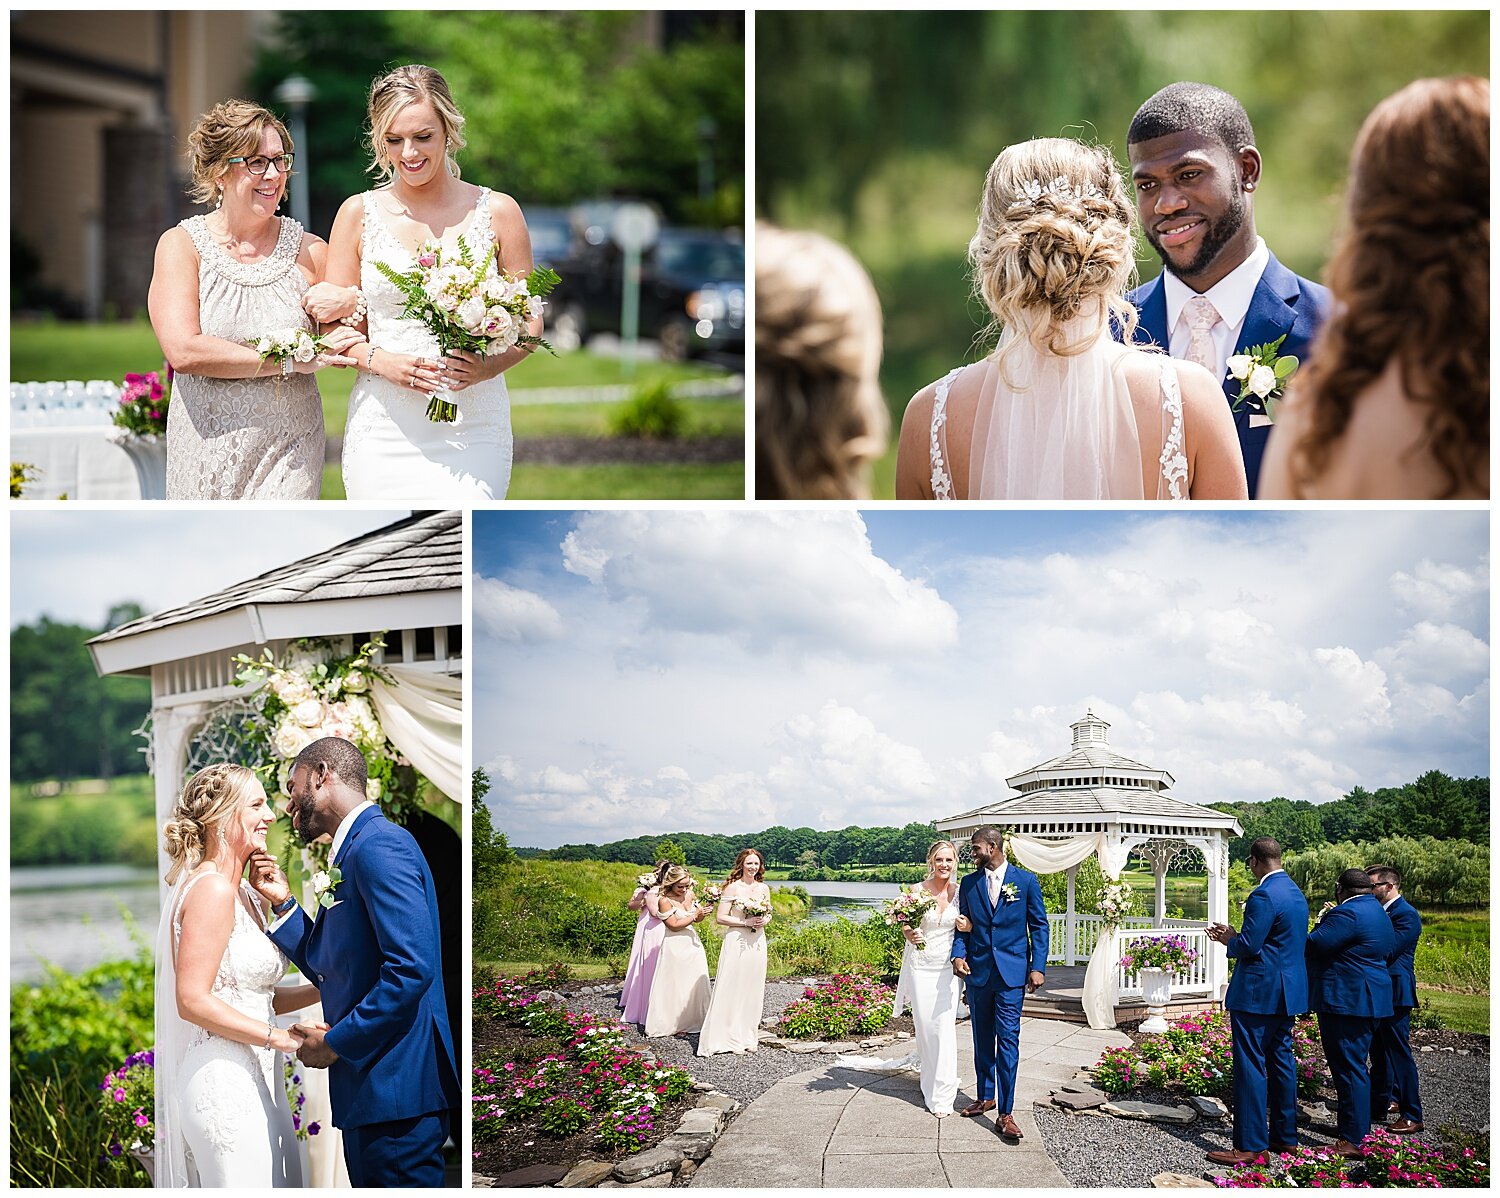  Bride and groom say “I DO” in beautiful outdoor wedding ceremony 